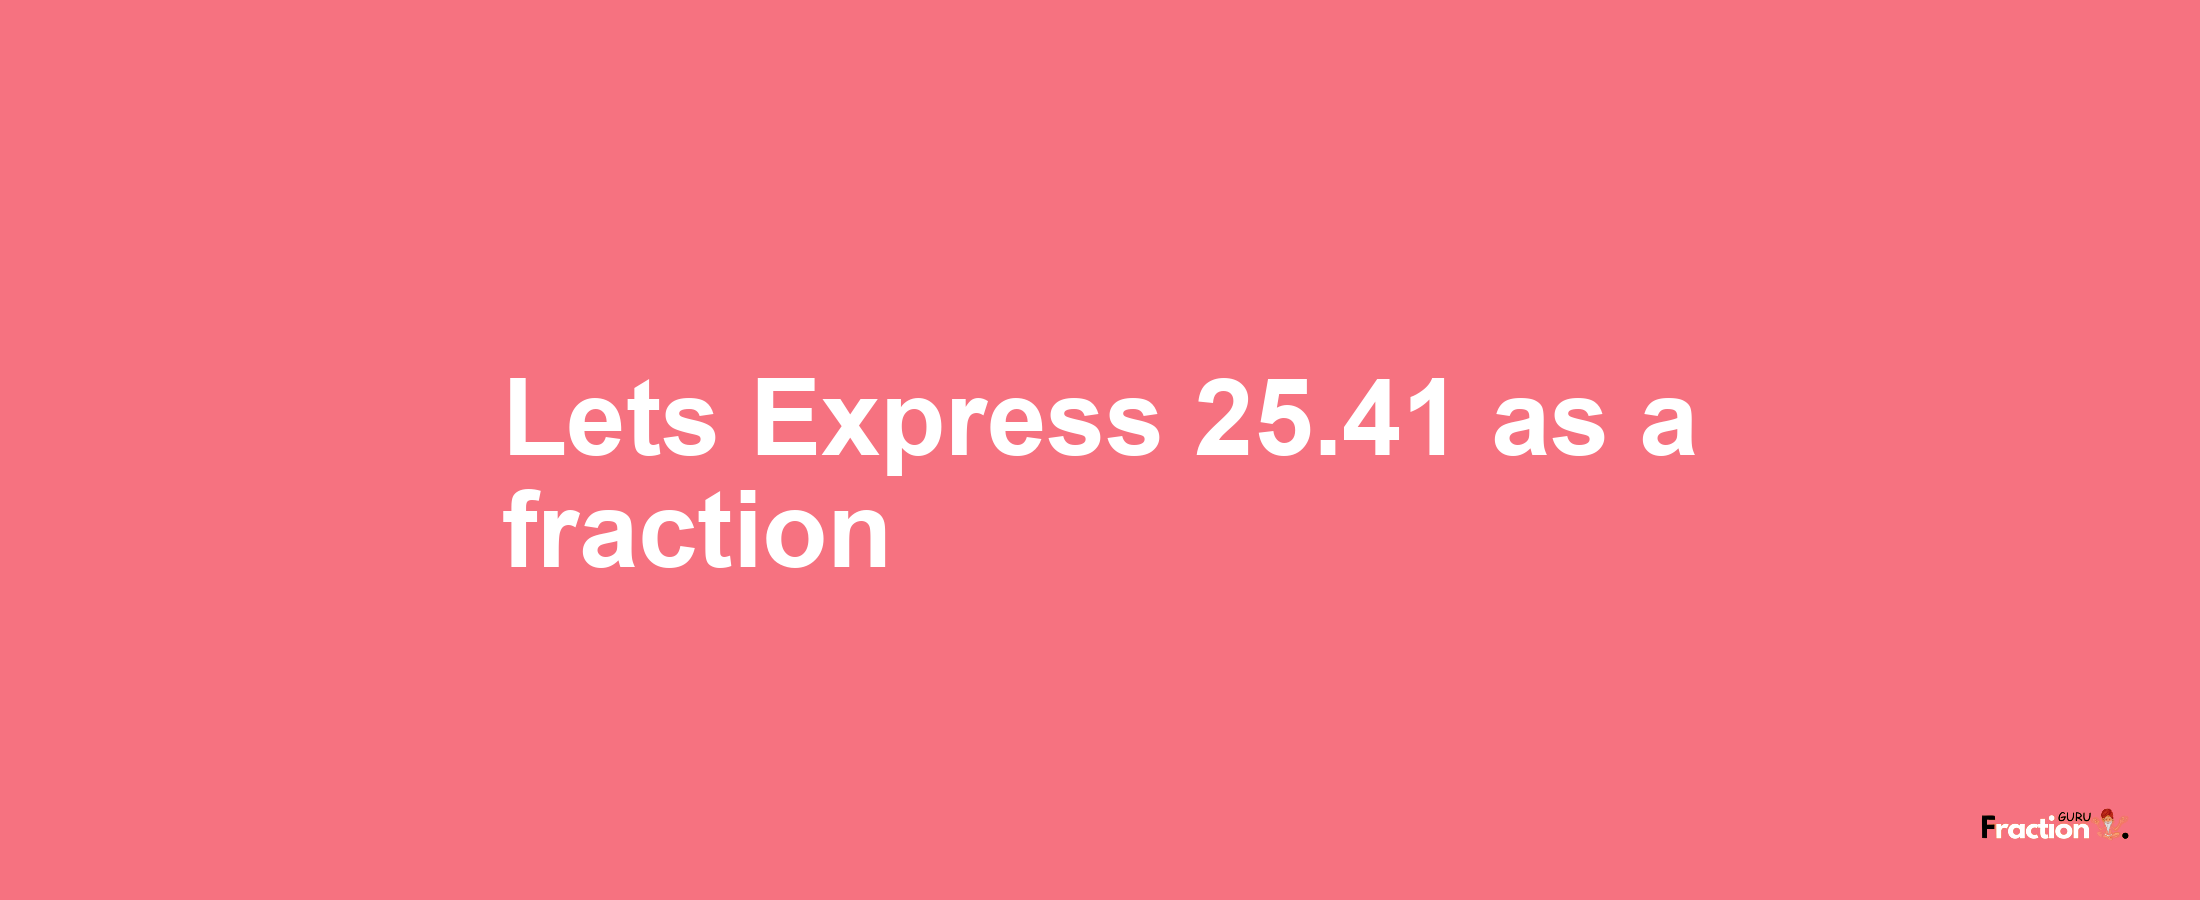 Lets Express 25.41 as afraction